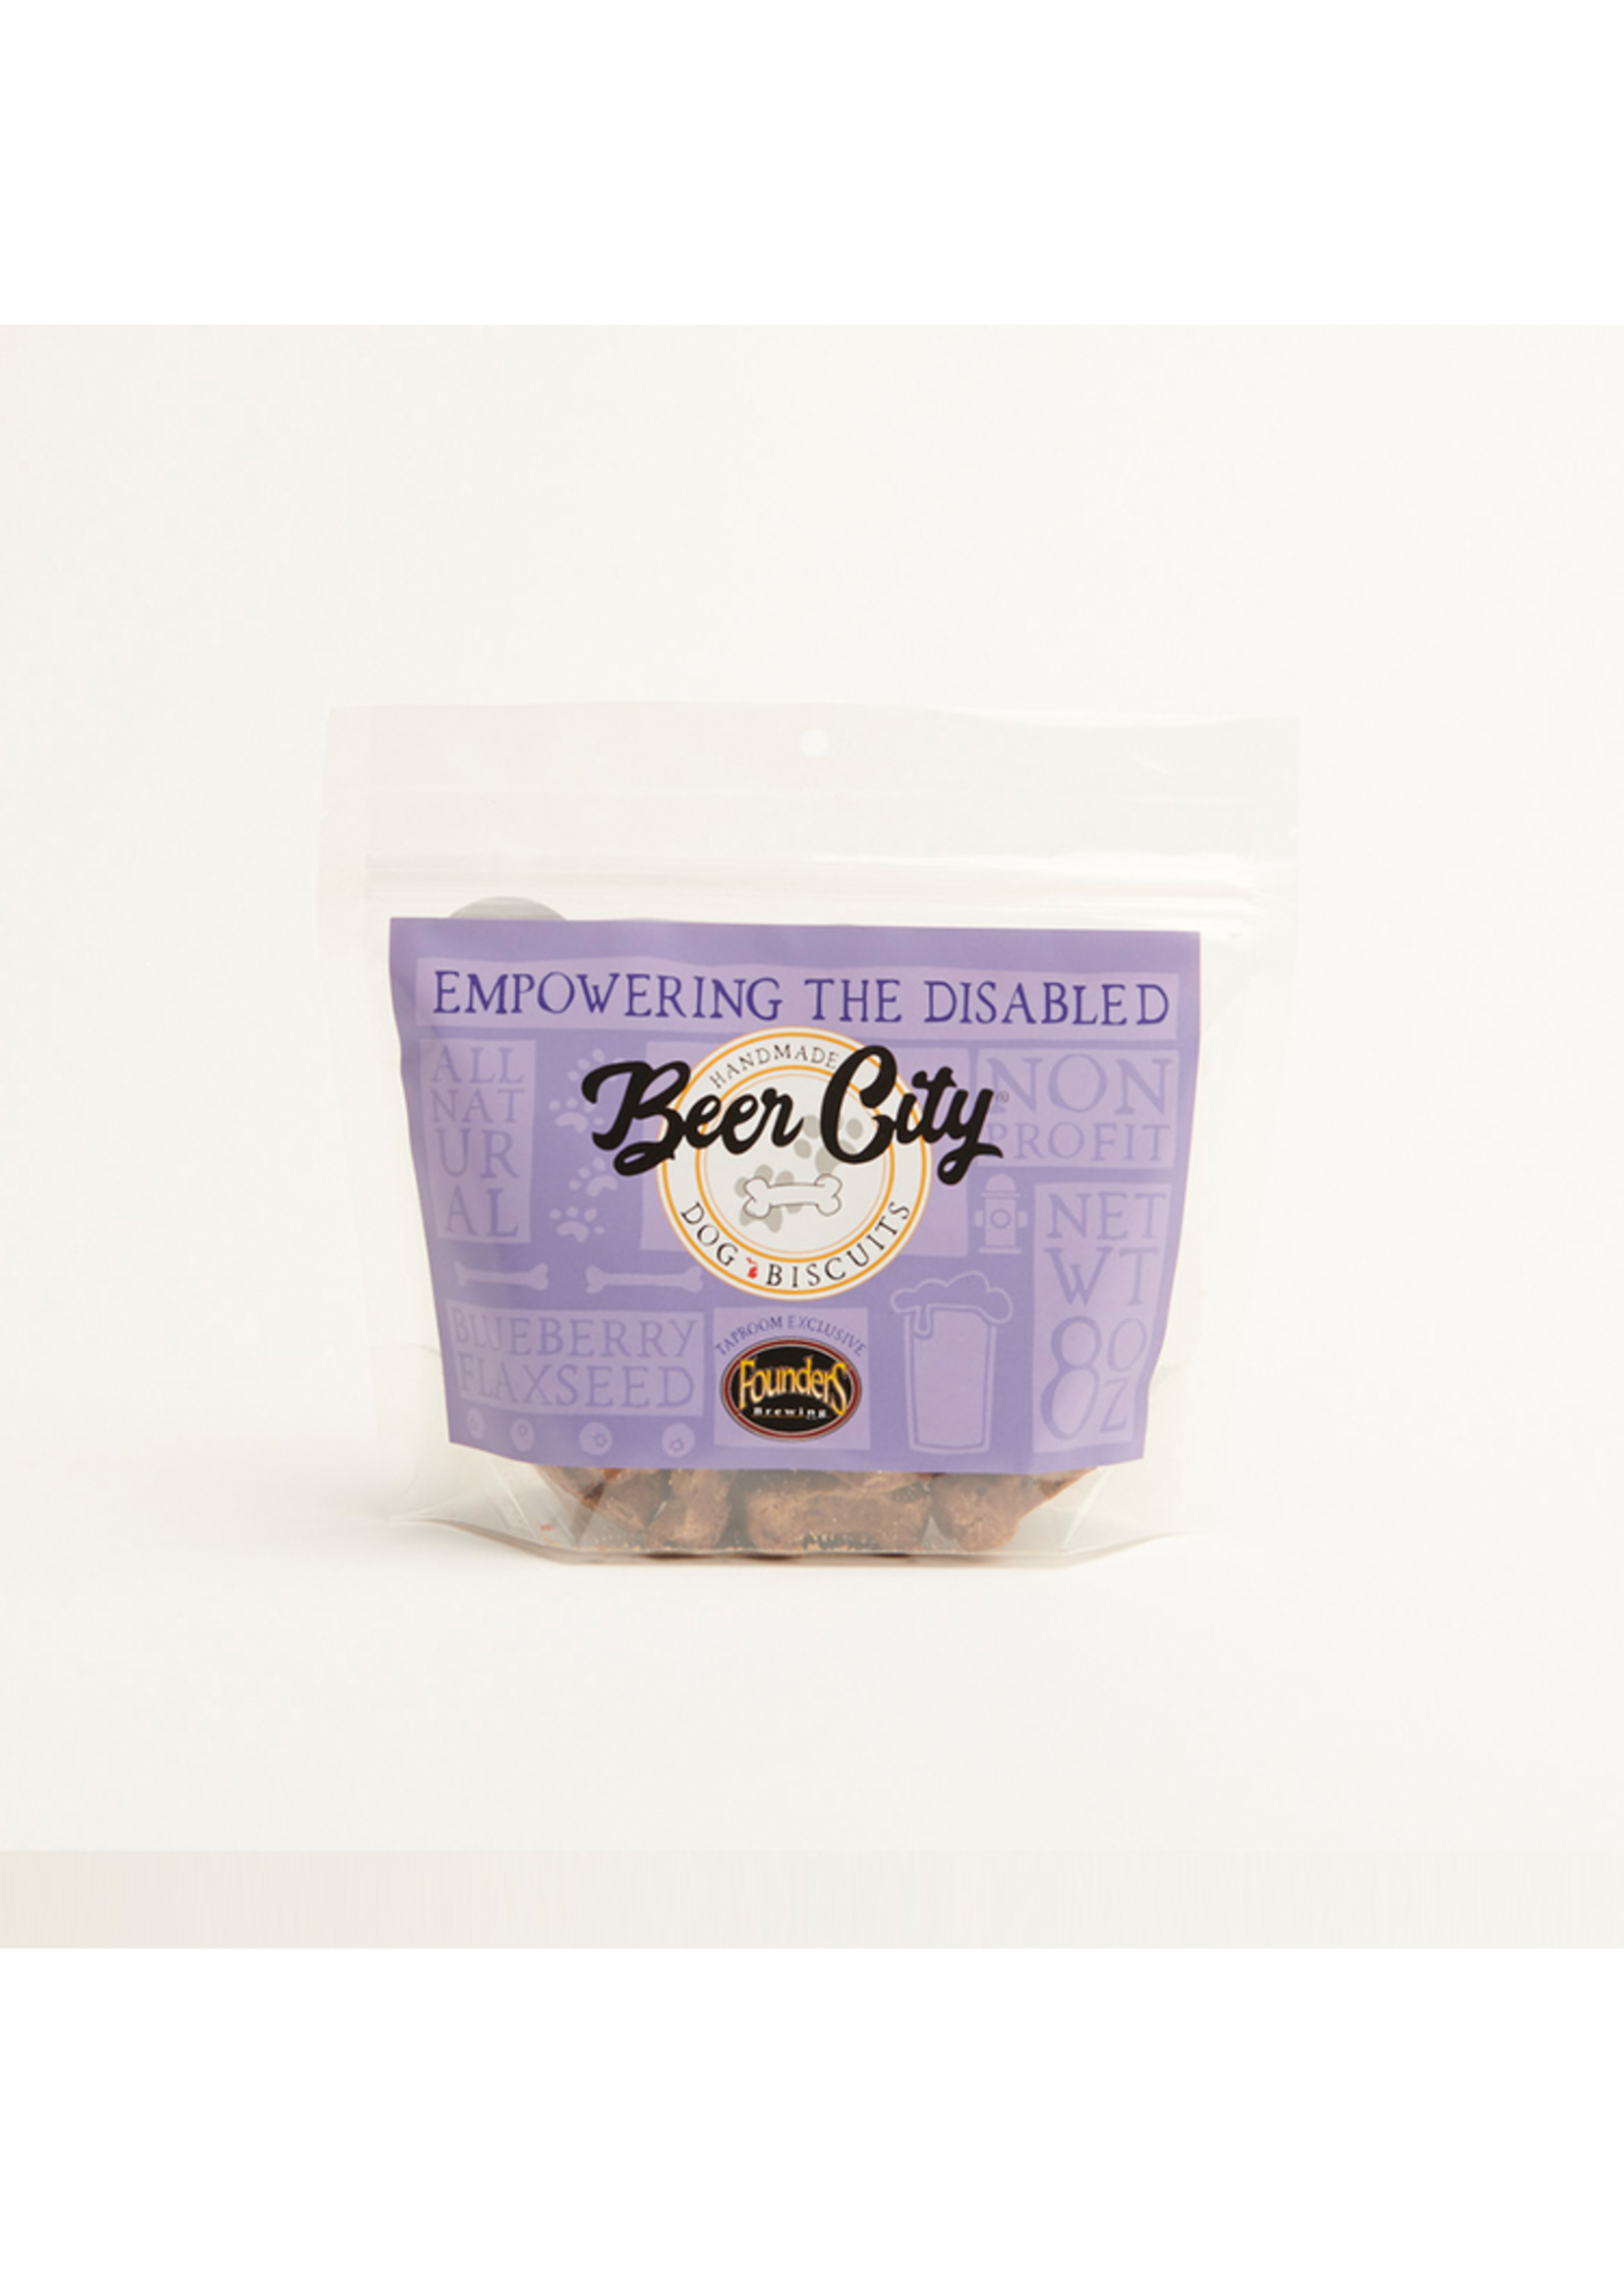 Beer City Dog Biscuits 8oz Blueberry Flaxeed Biscuits